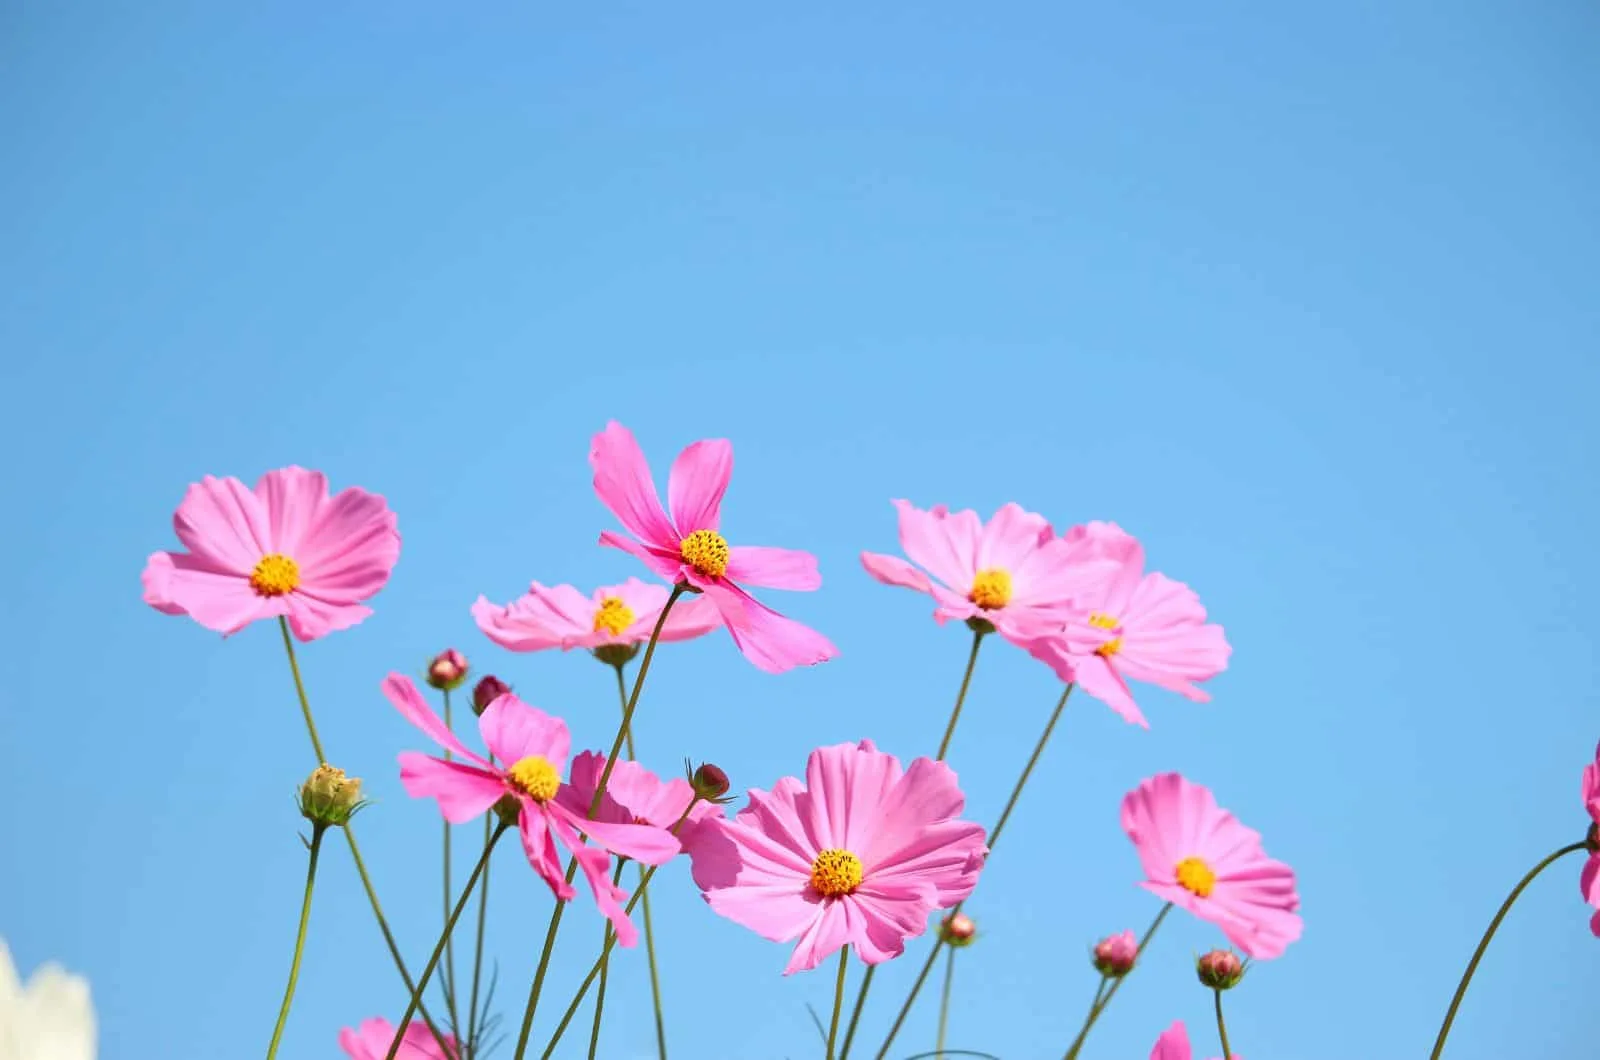 Cosmos Flowers and sky